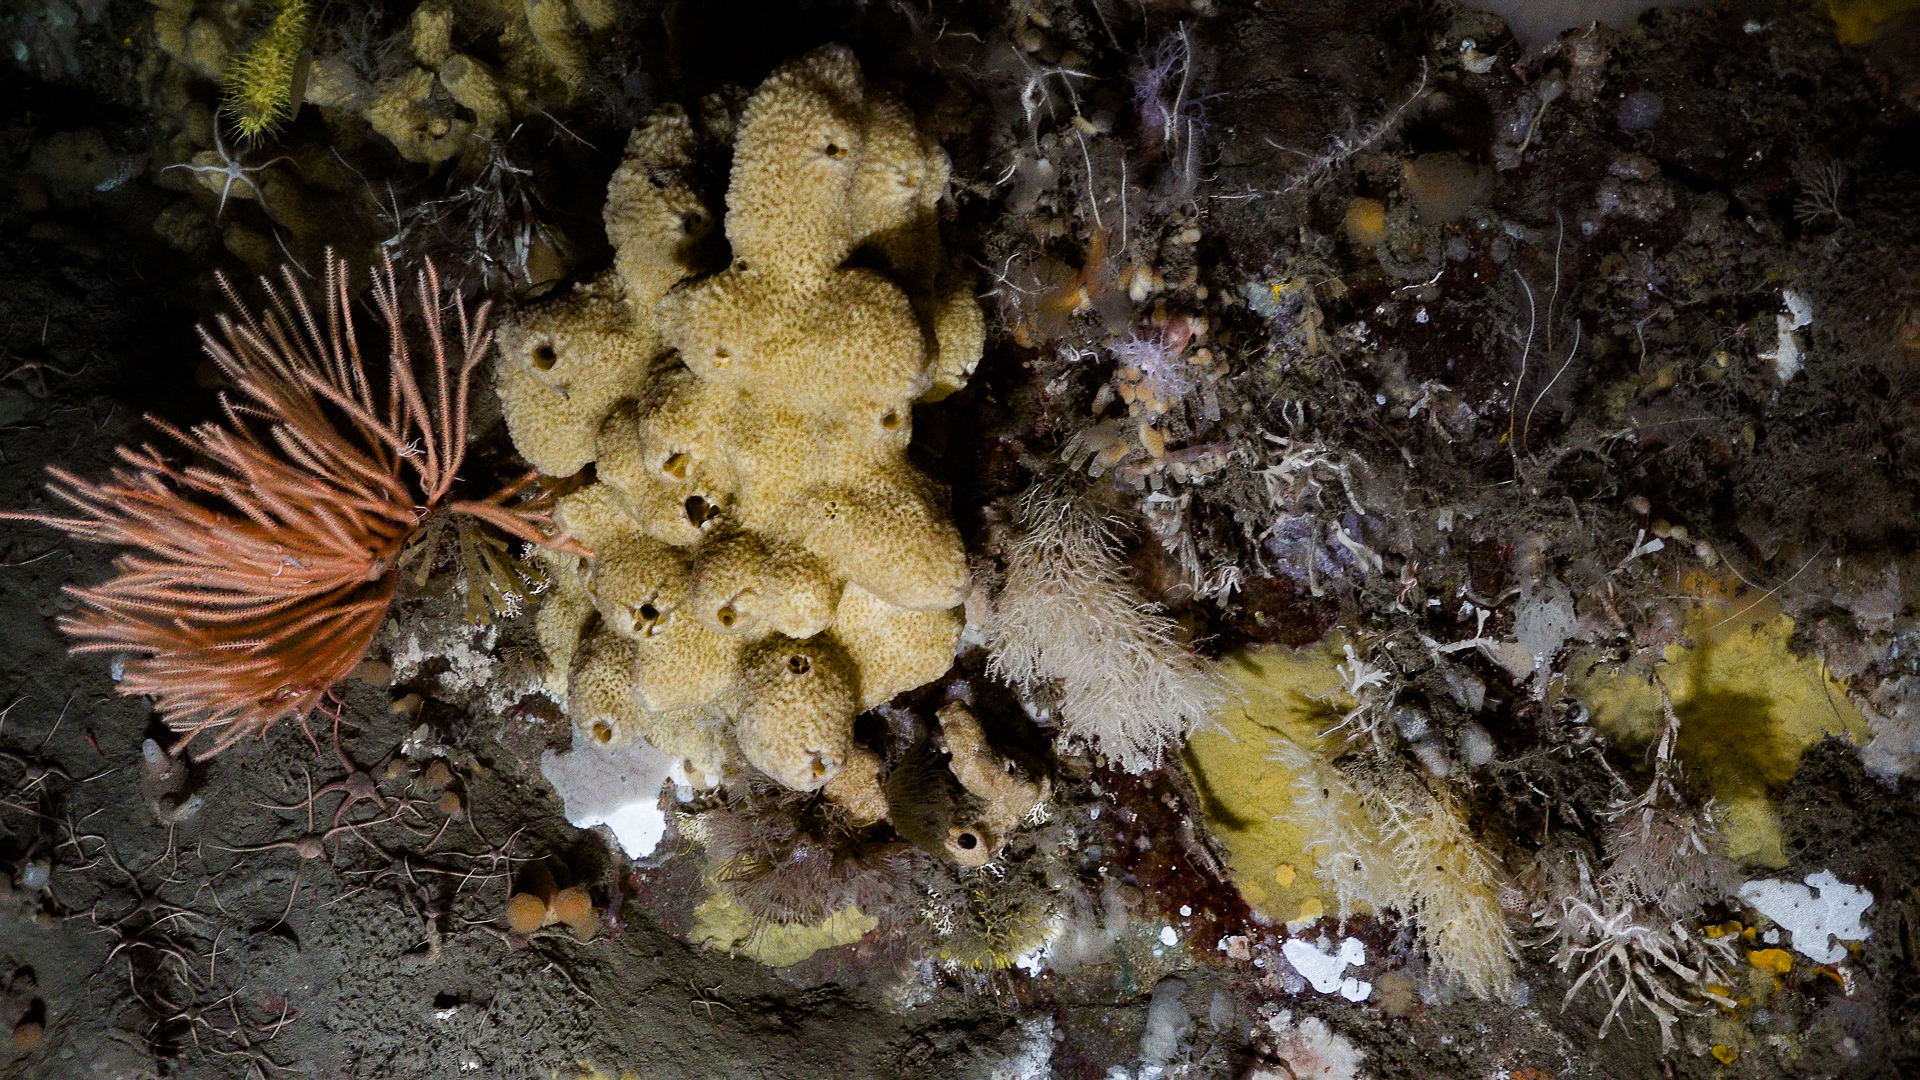 Yellow sponges, red coral and other marine life clustered together on the seabed